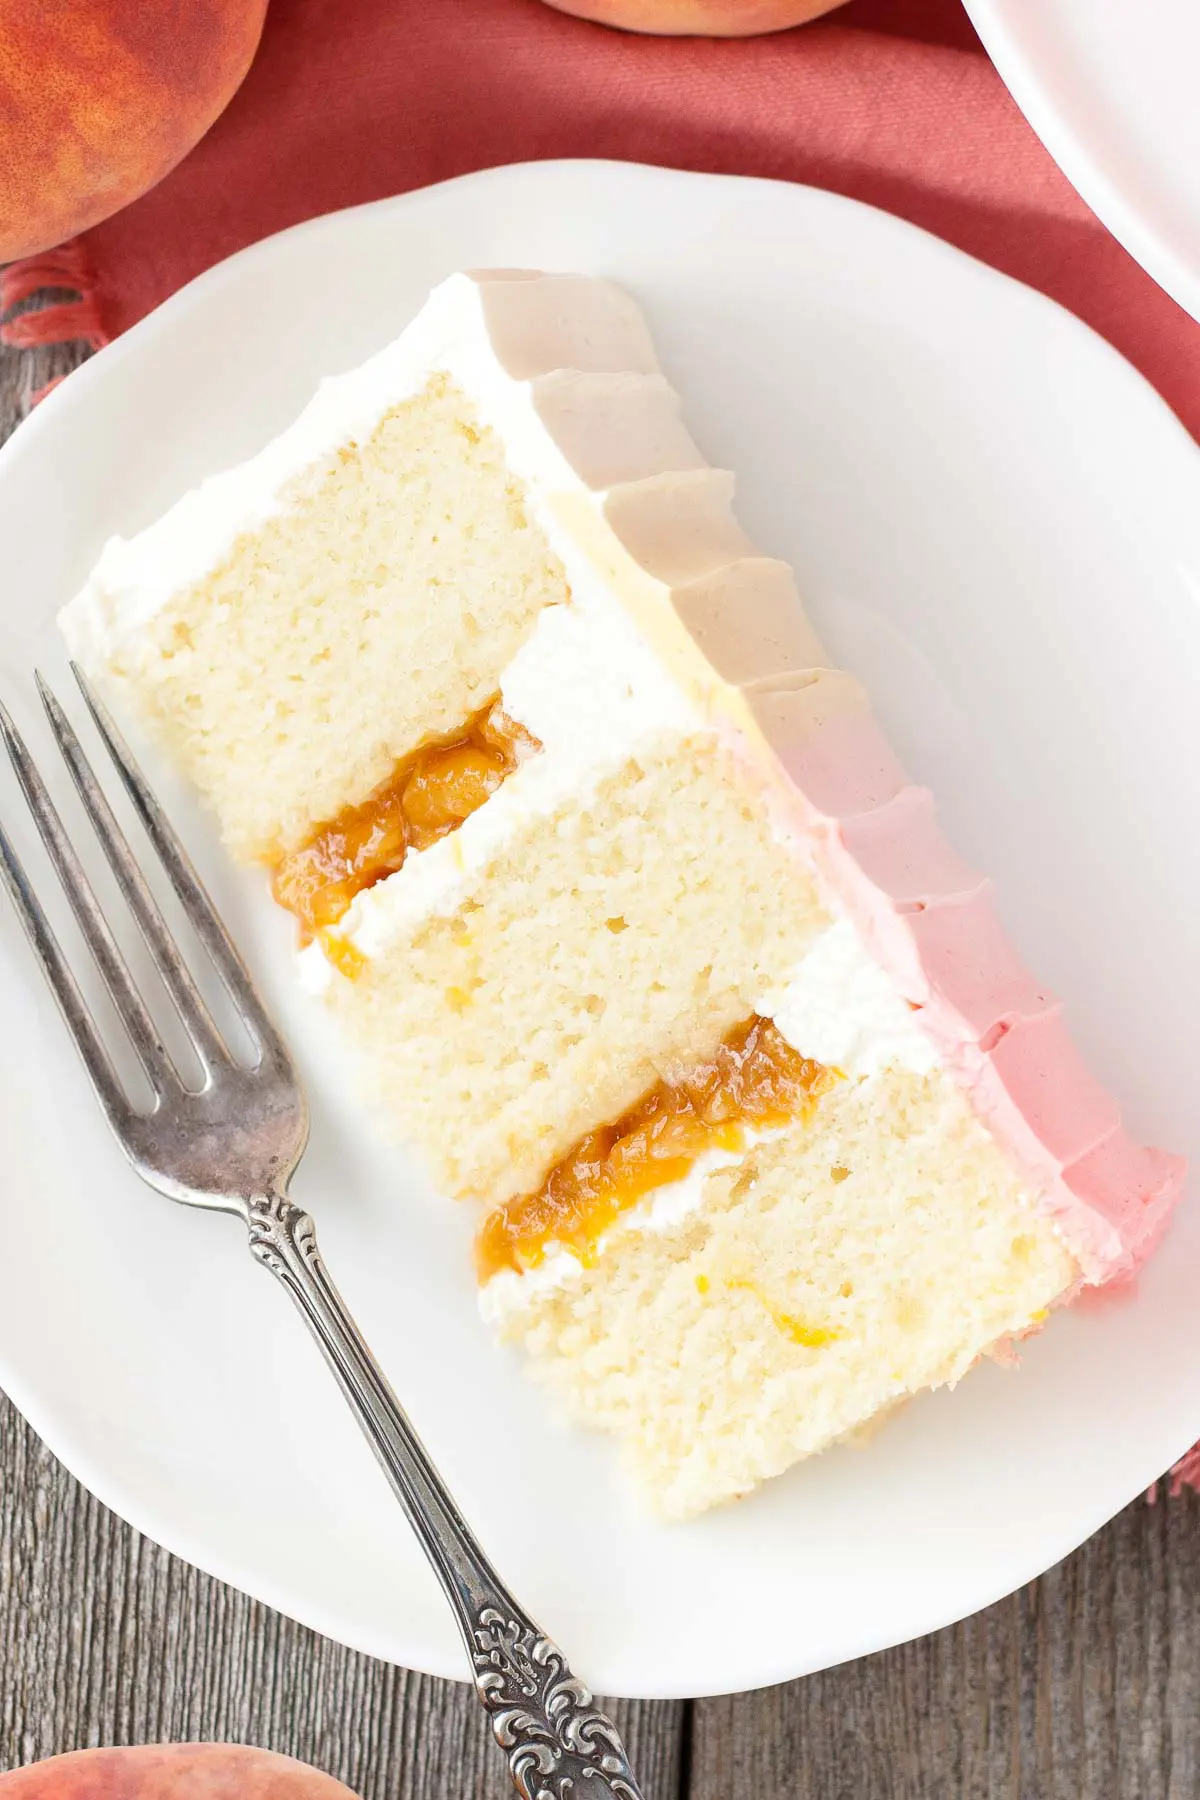 Another picture of a cake slice on a plate showing the homemade peach filling.